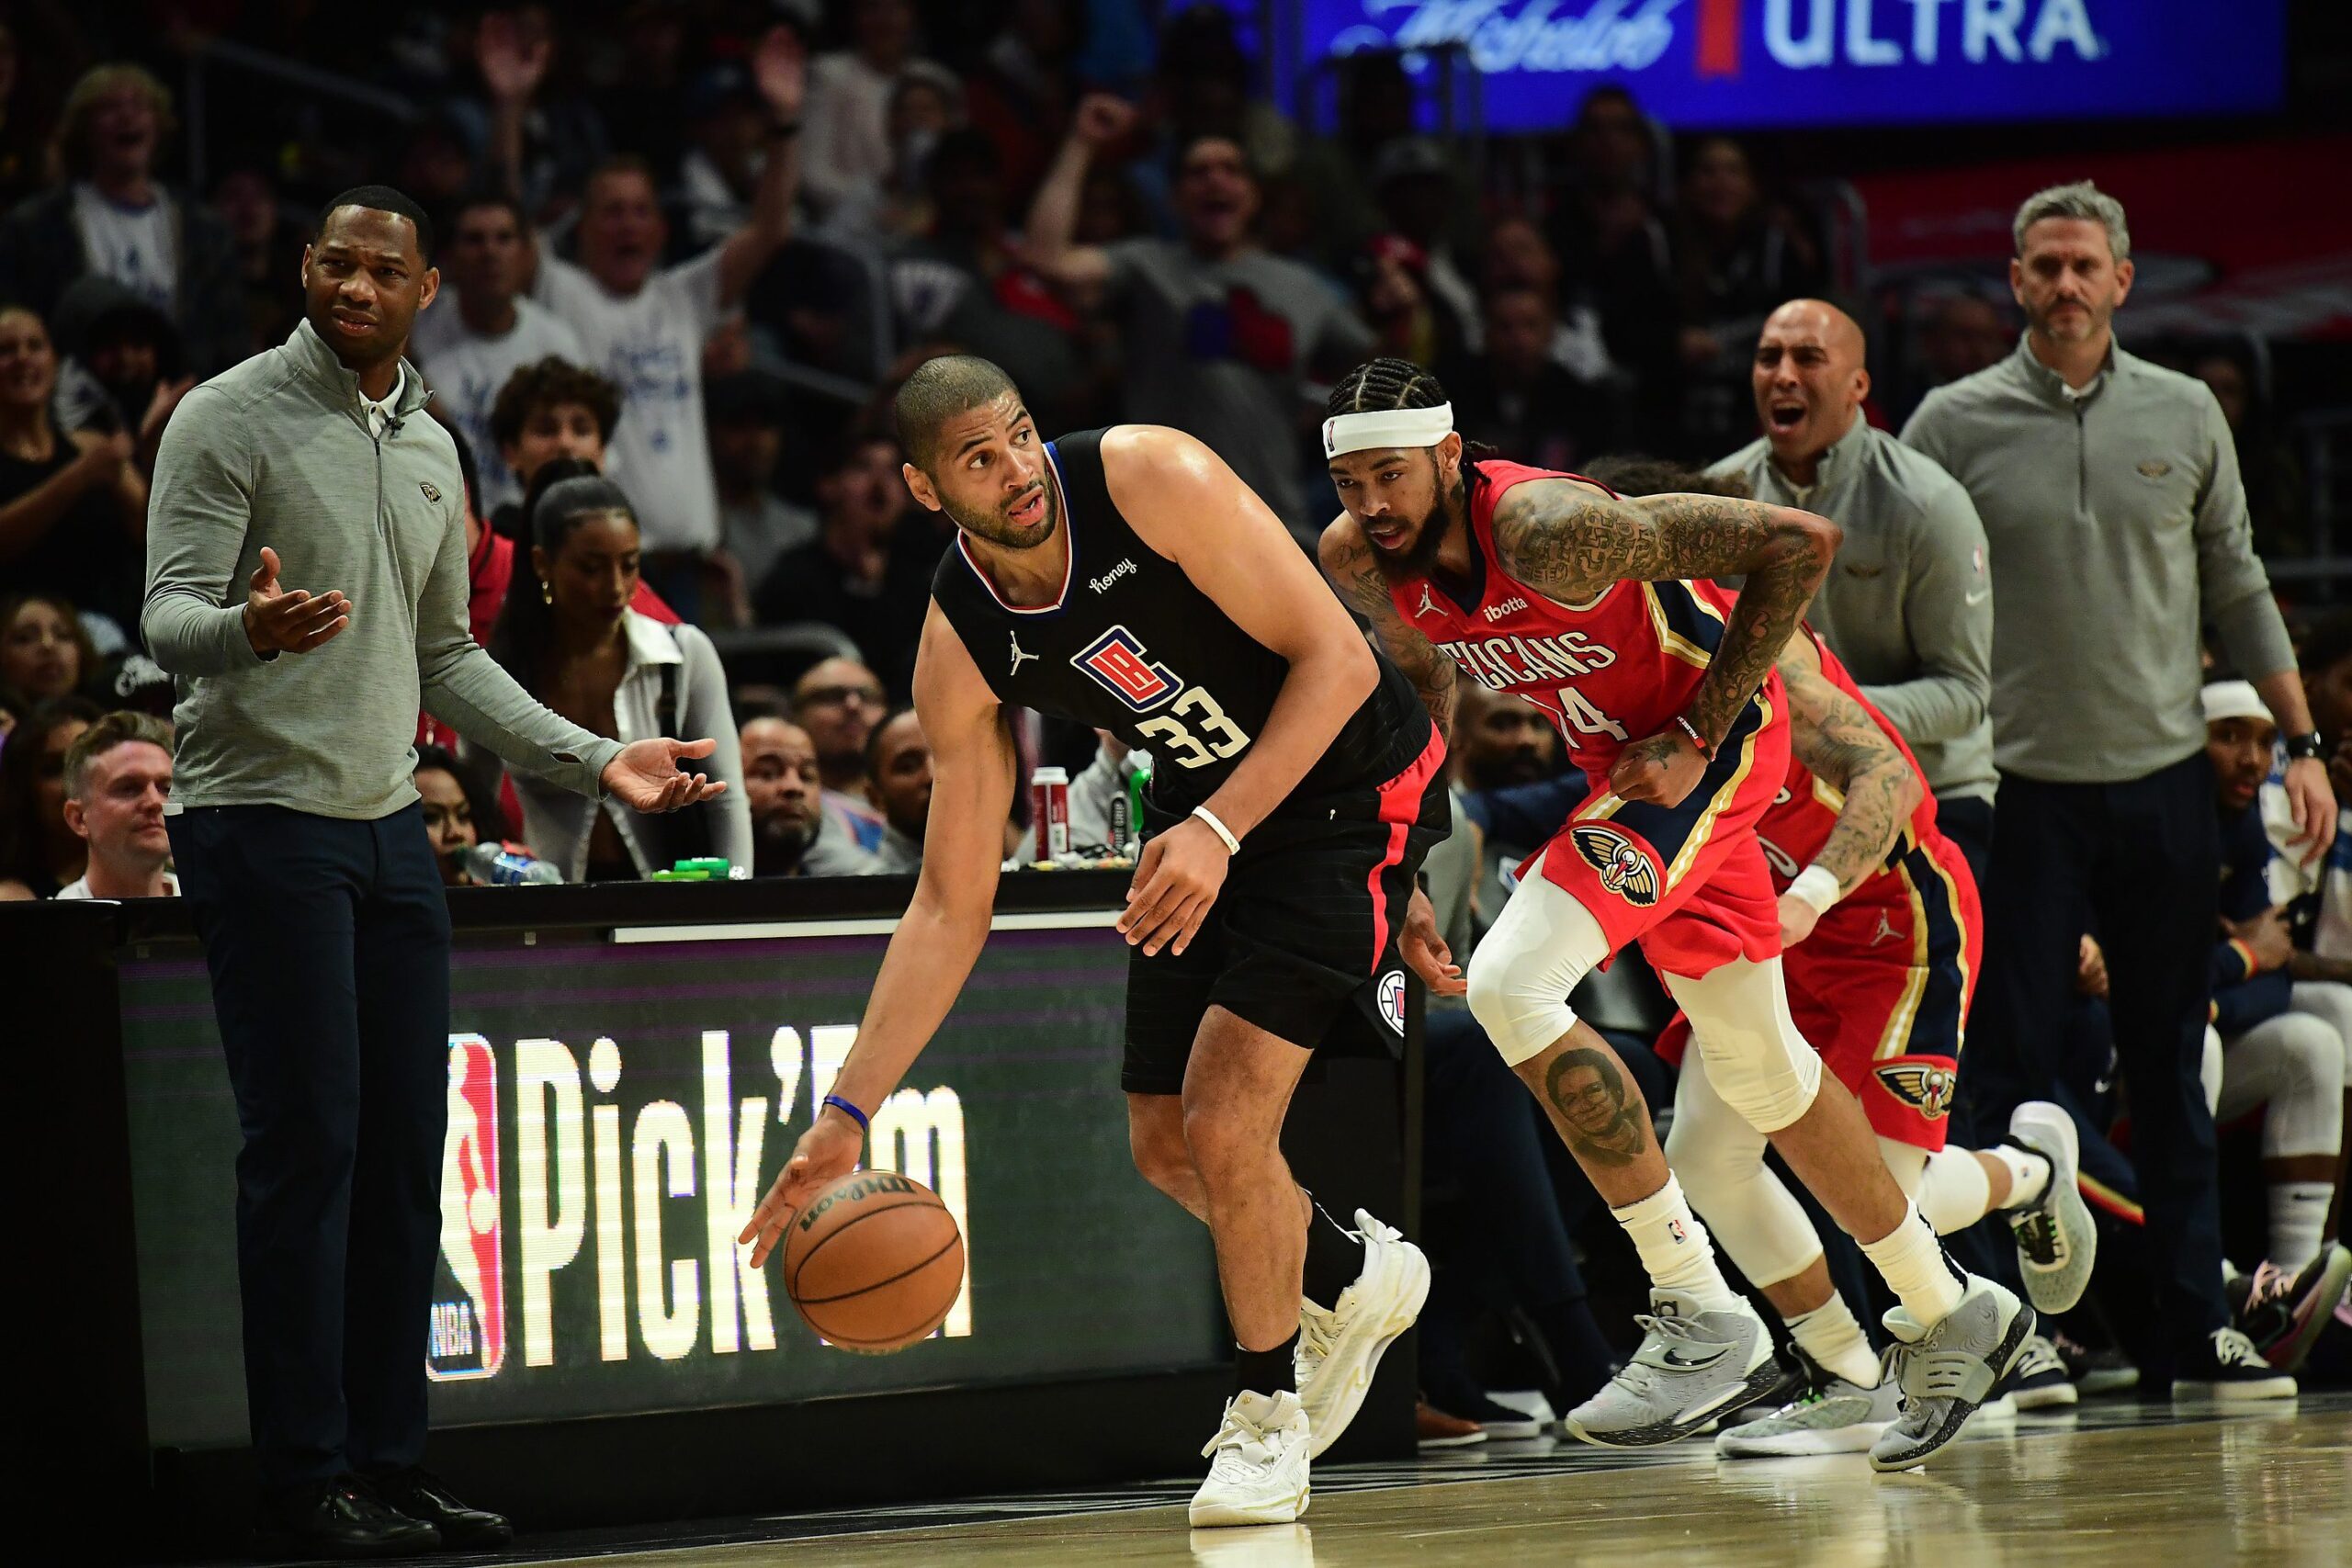 Los Angeles Clippers forward Nicolas Batum gets the ball away from New Orleans Pelicans forward Brandon Ingram